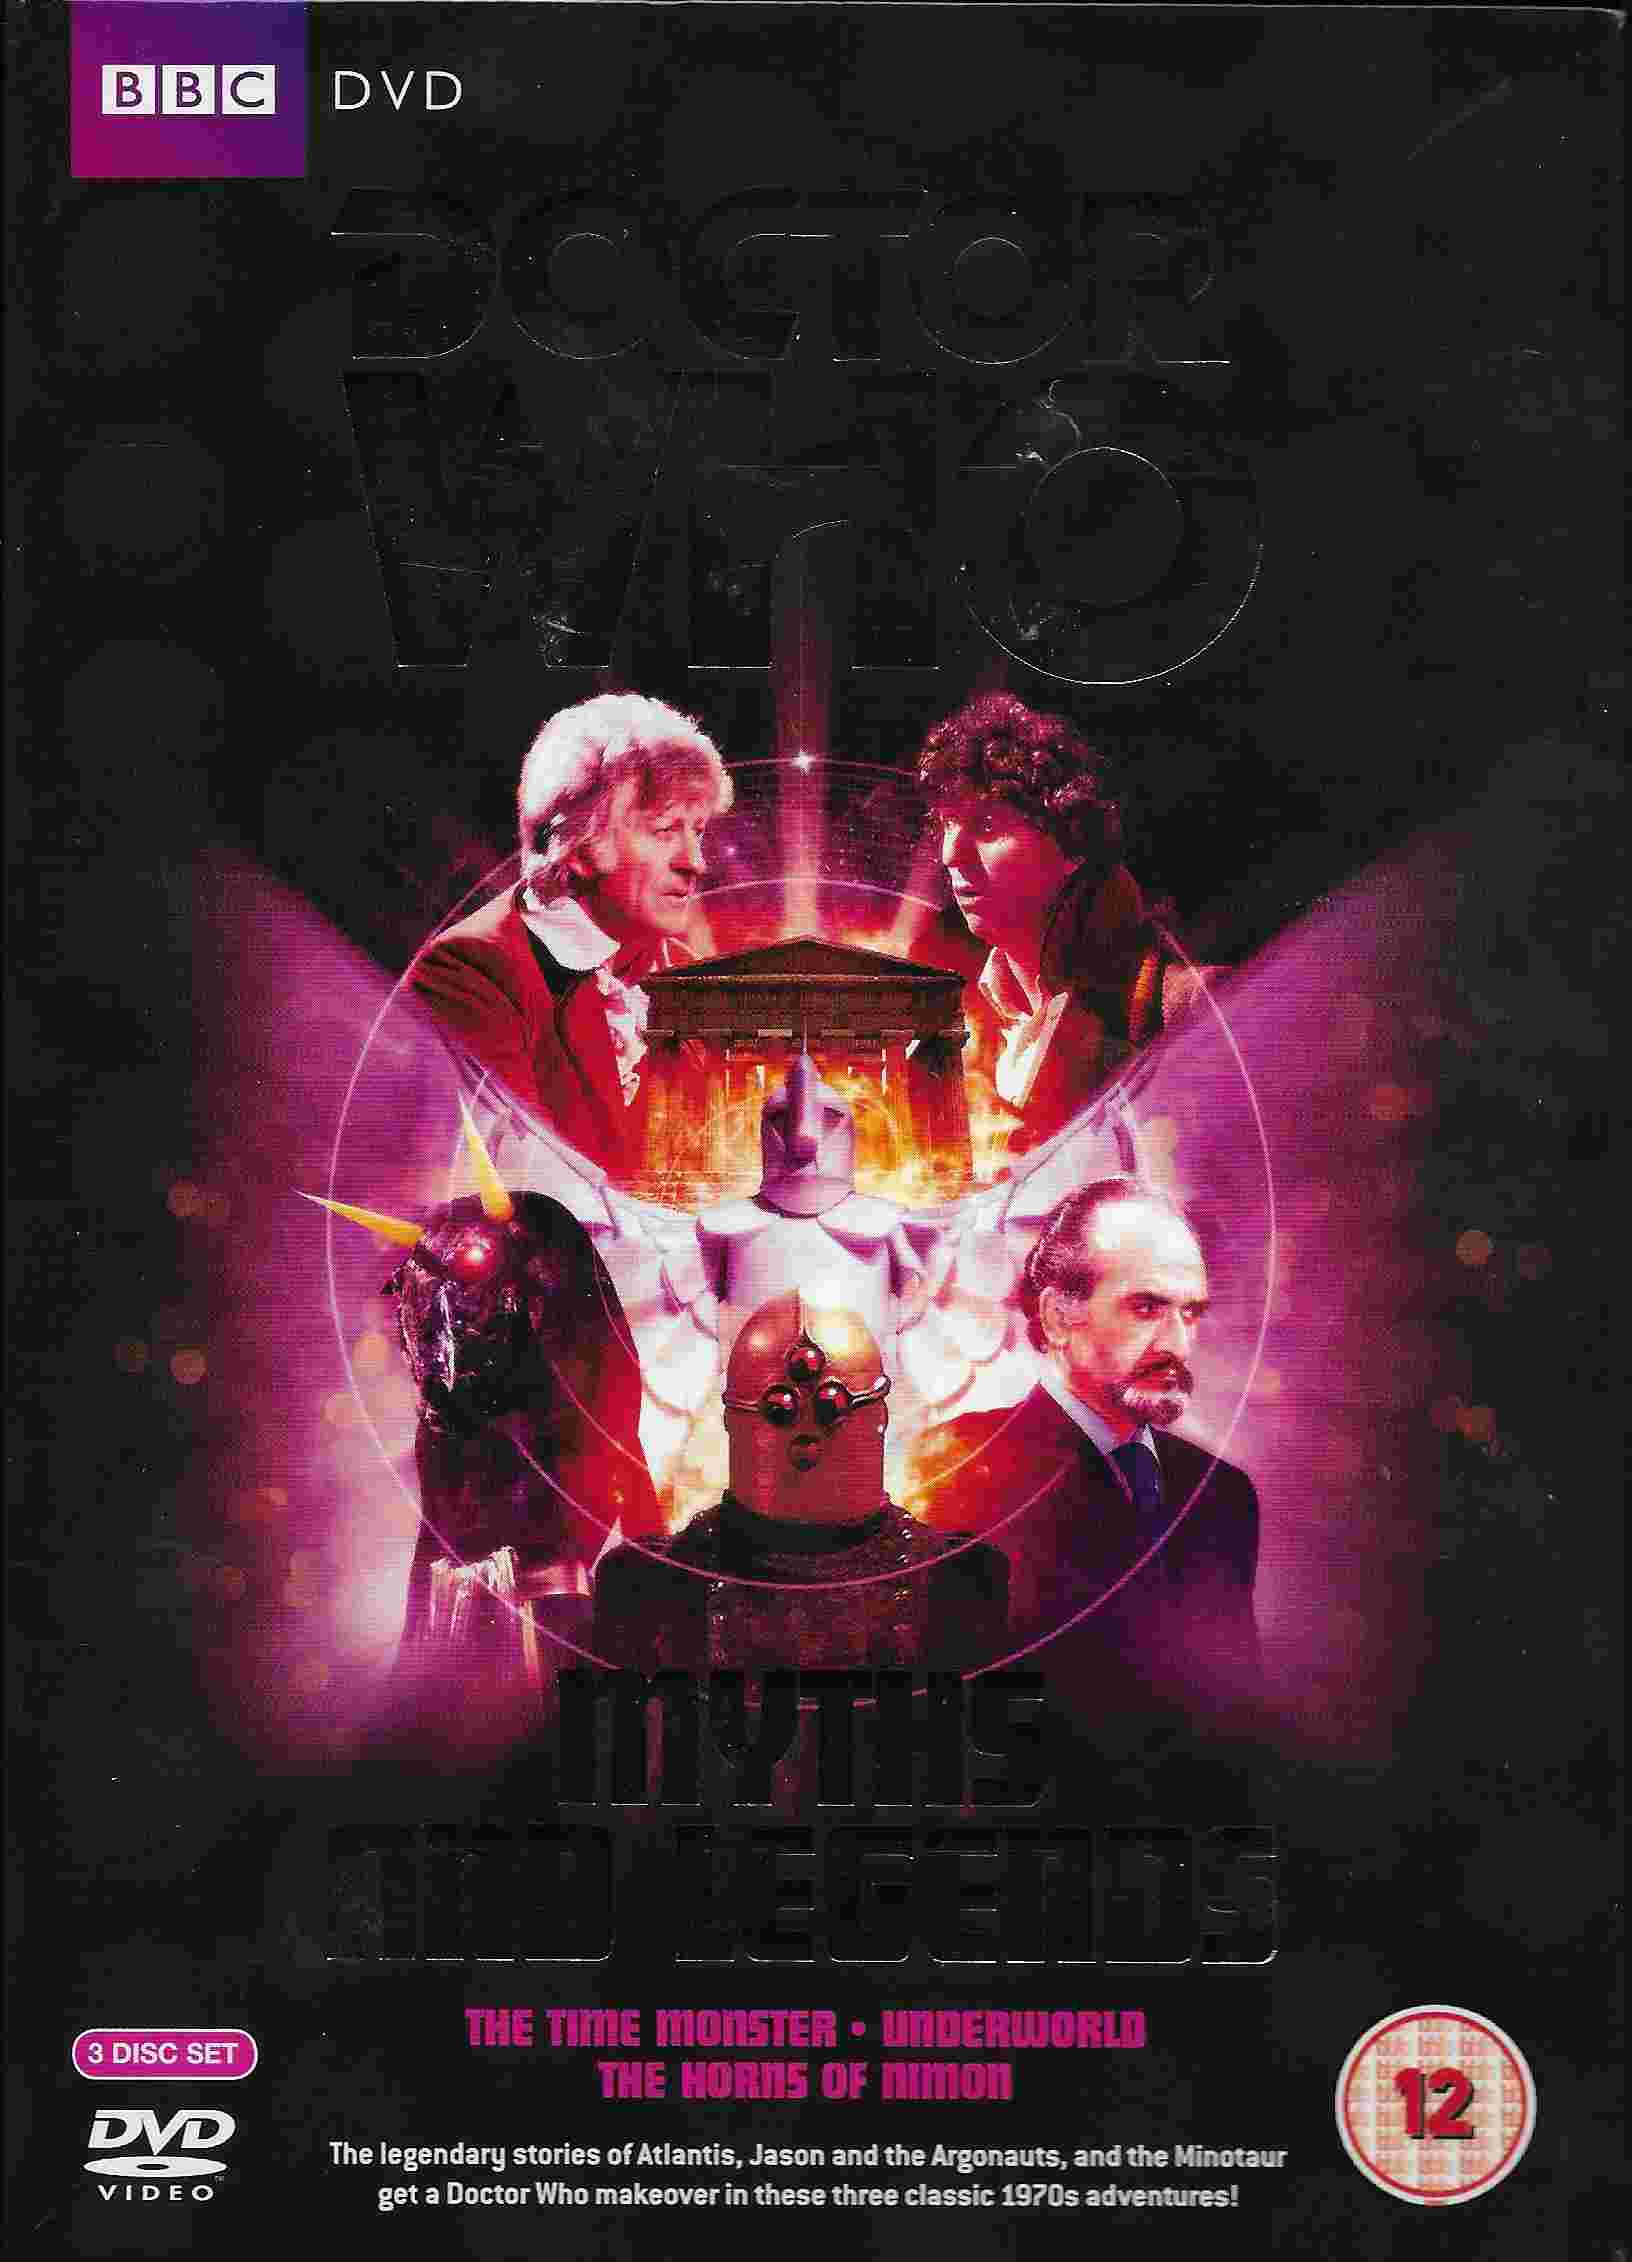 Picture of BBCDVD 2851 Doctor Who - Myths and Legends by artist Robert Sloman / Bob Baker / Dave Martin / Anthony Read from the BBC dvds - Records and Tapes library